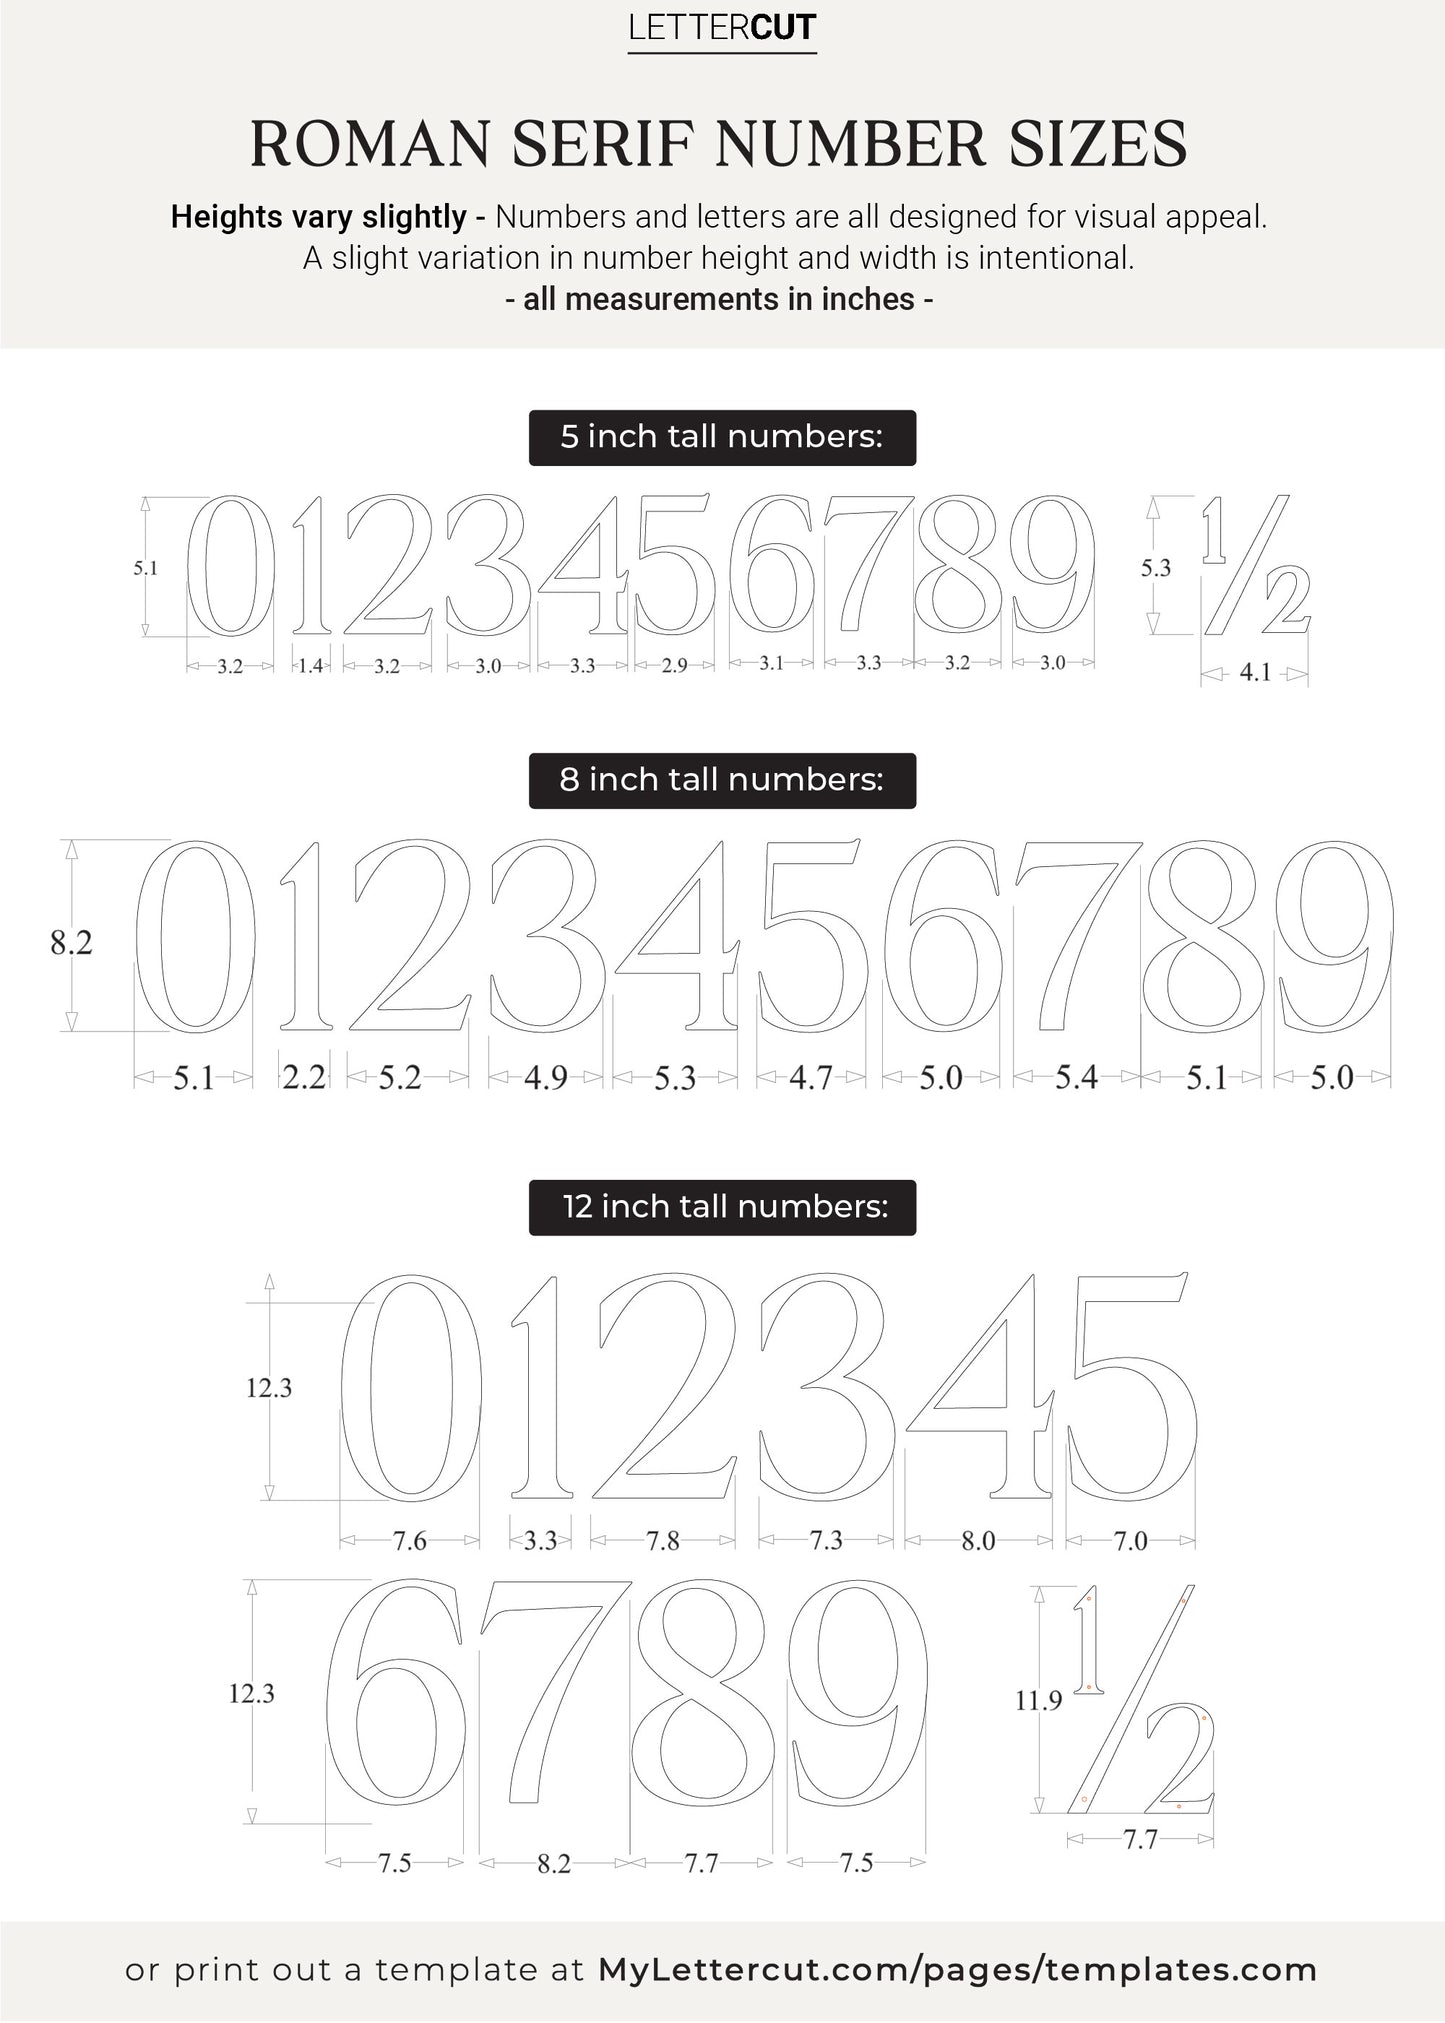 ROMAN SERIF house number sizes and measurements